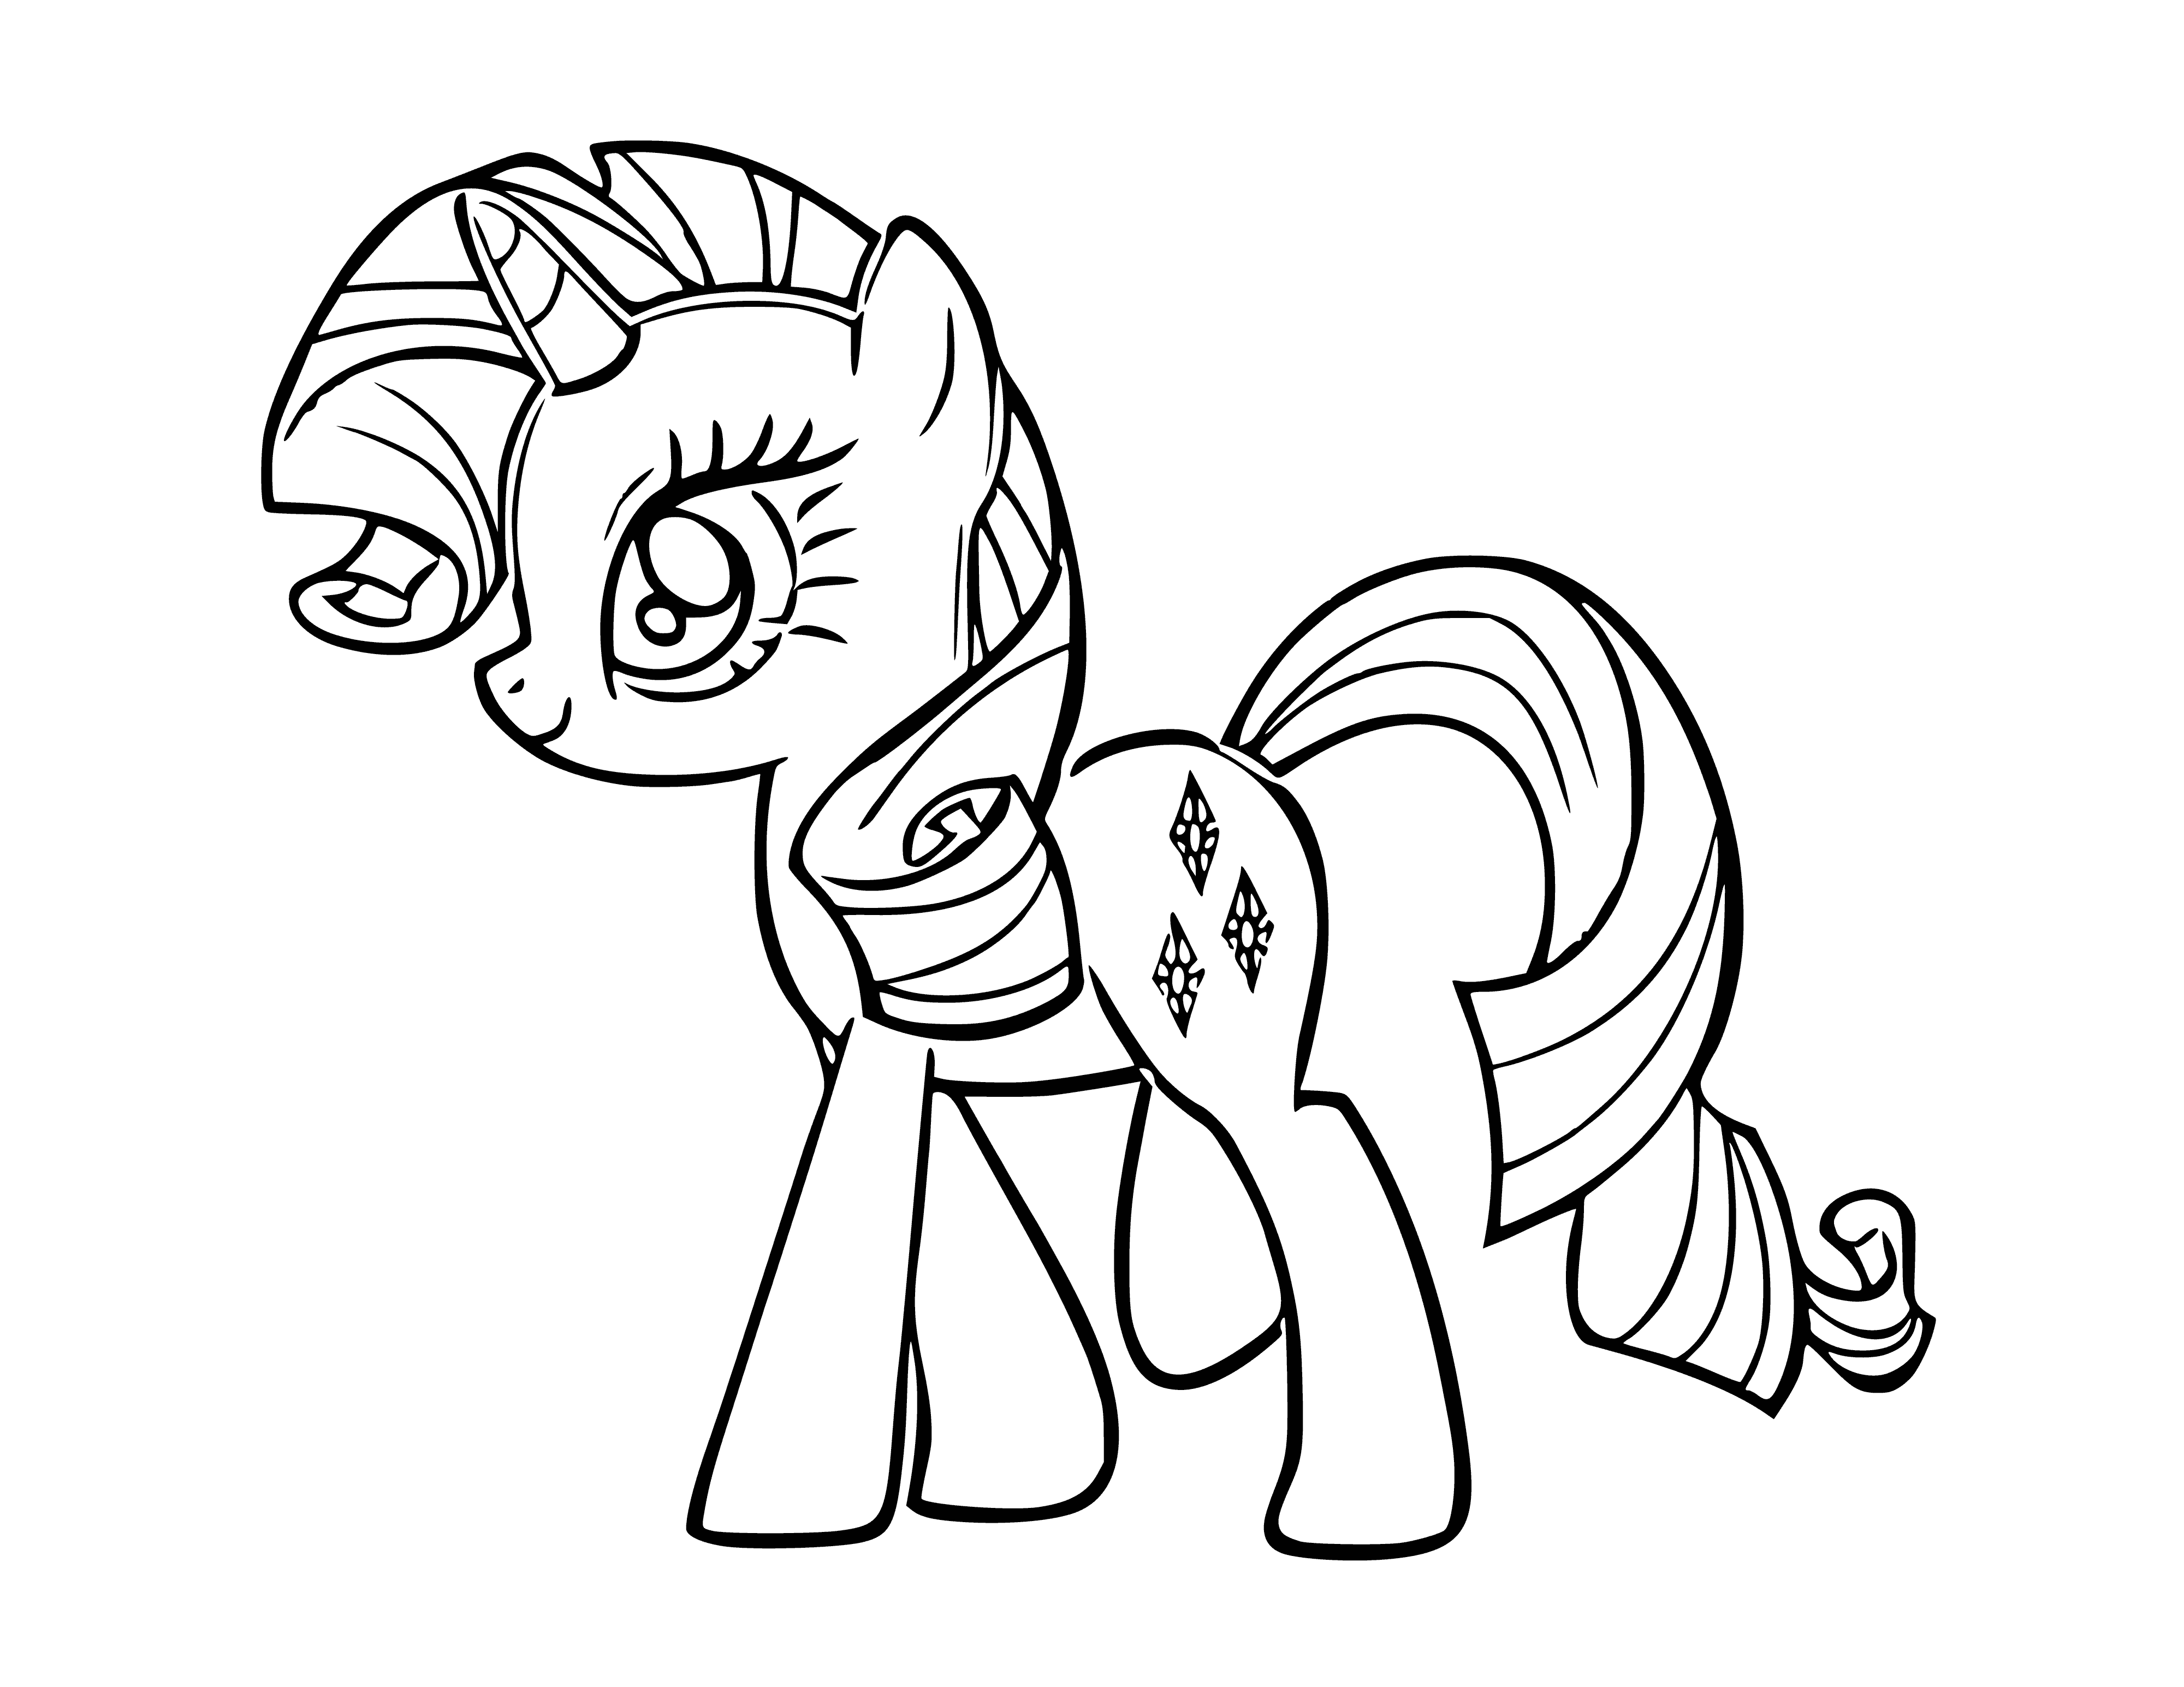 coloring page: White toy pony with blue mane/tail, pink nose/blue eyes, wearing pink ribbon around neck- This is the Rarity Pony Rariti. #toys